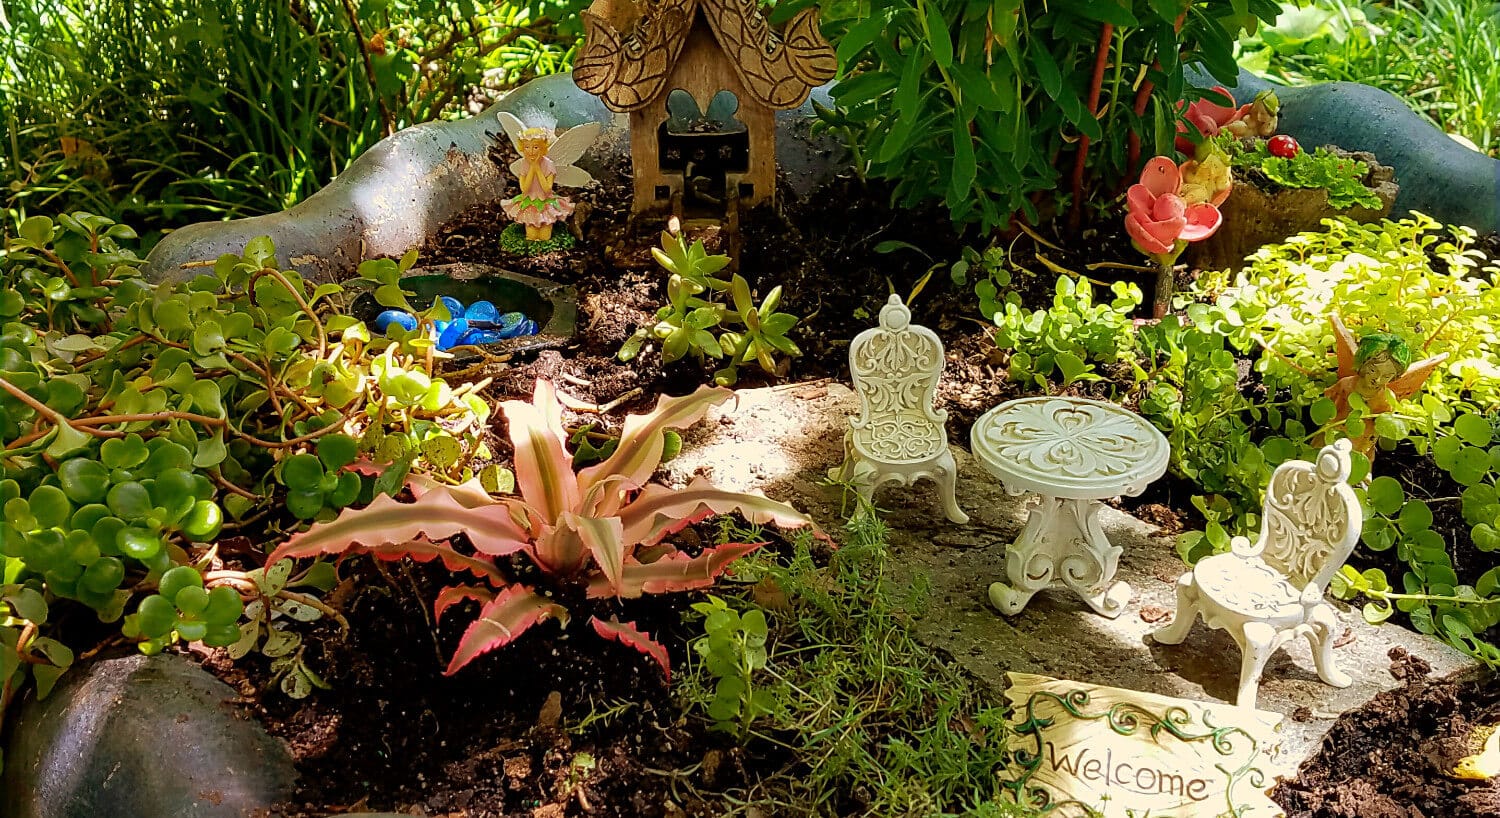 Fairy garden with a tiny house and patio furniture among plants. 